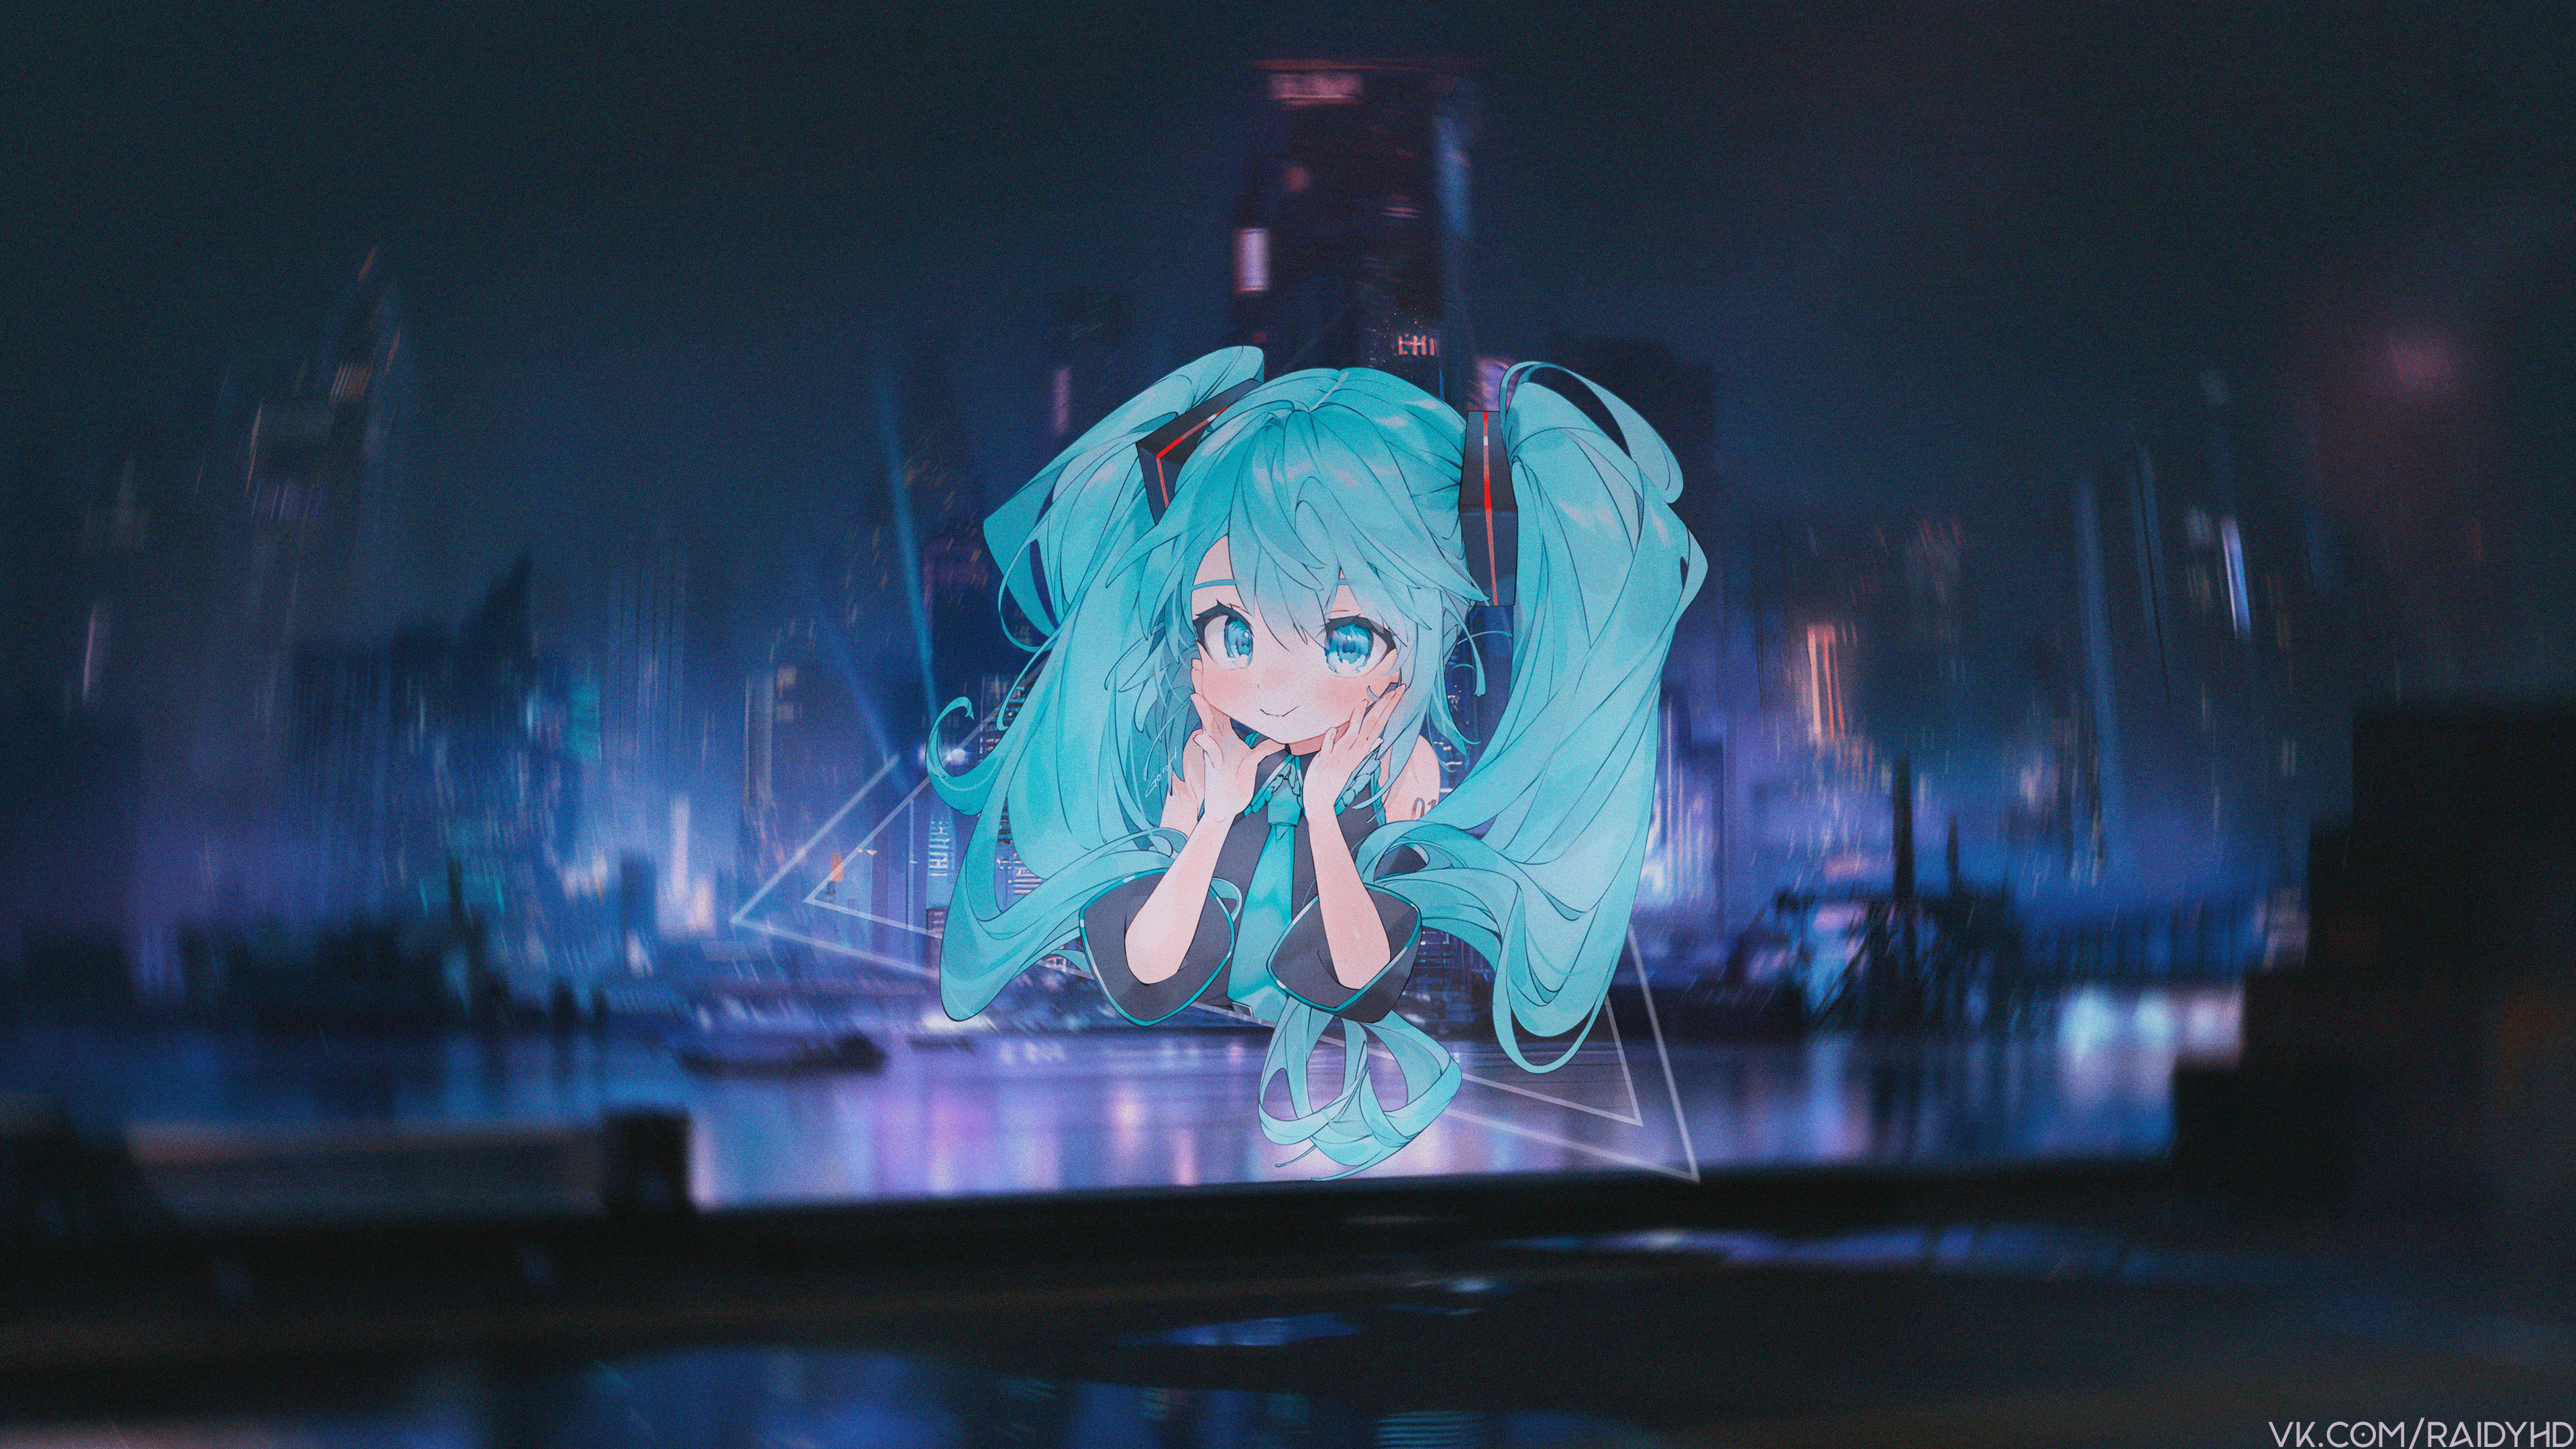 Anime 3840x2160 Hatsune Miku anime anime girls picture-in-picture Vocaloid